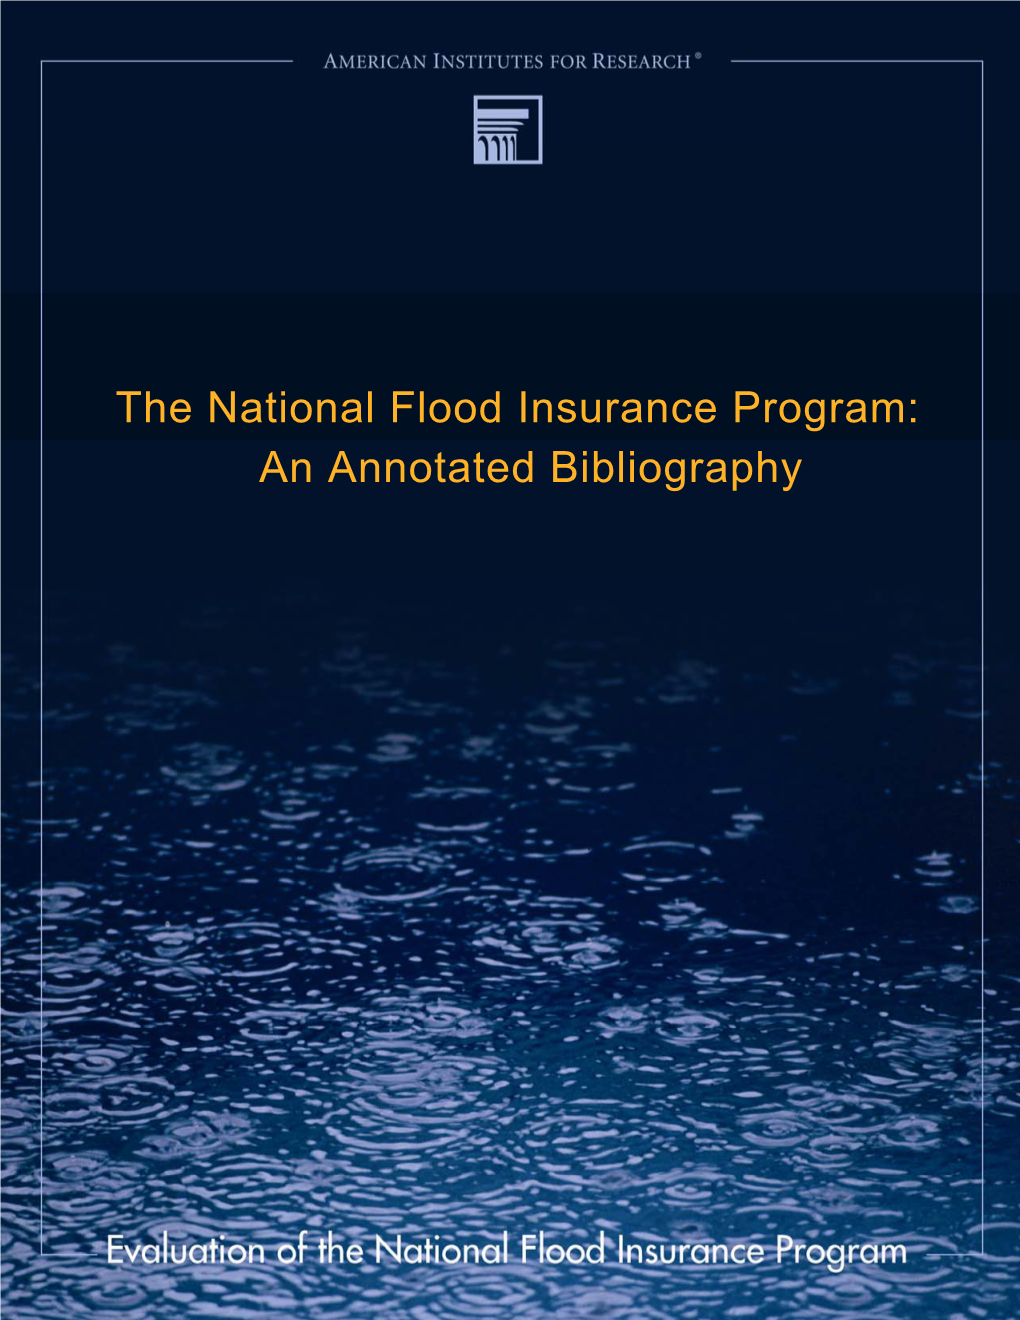 The National Flood Insurance Program: an Annotated Bibliography